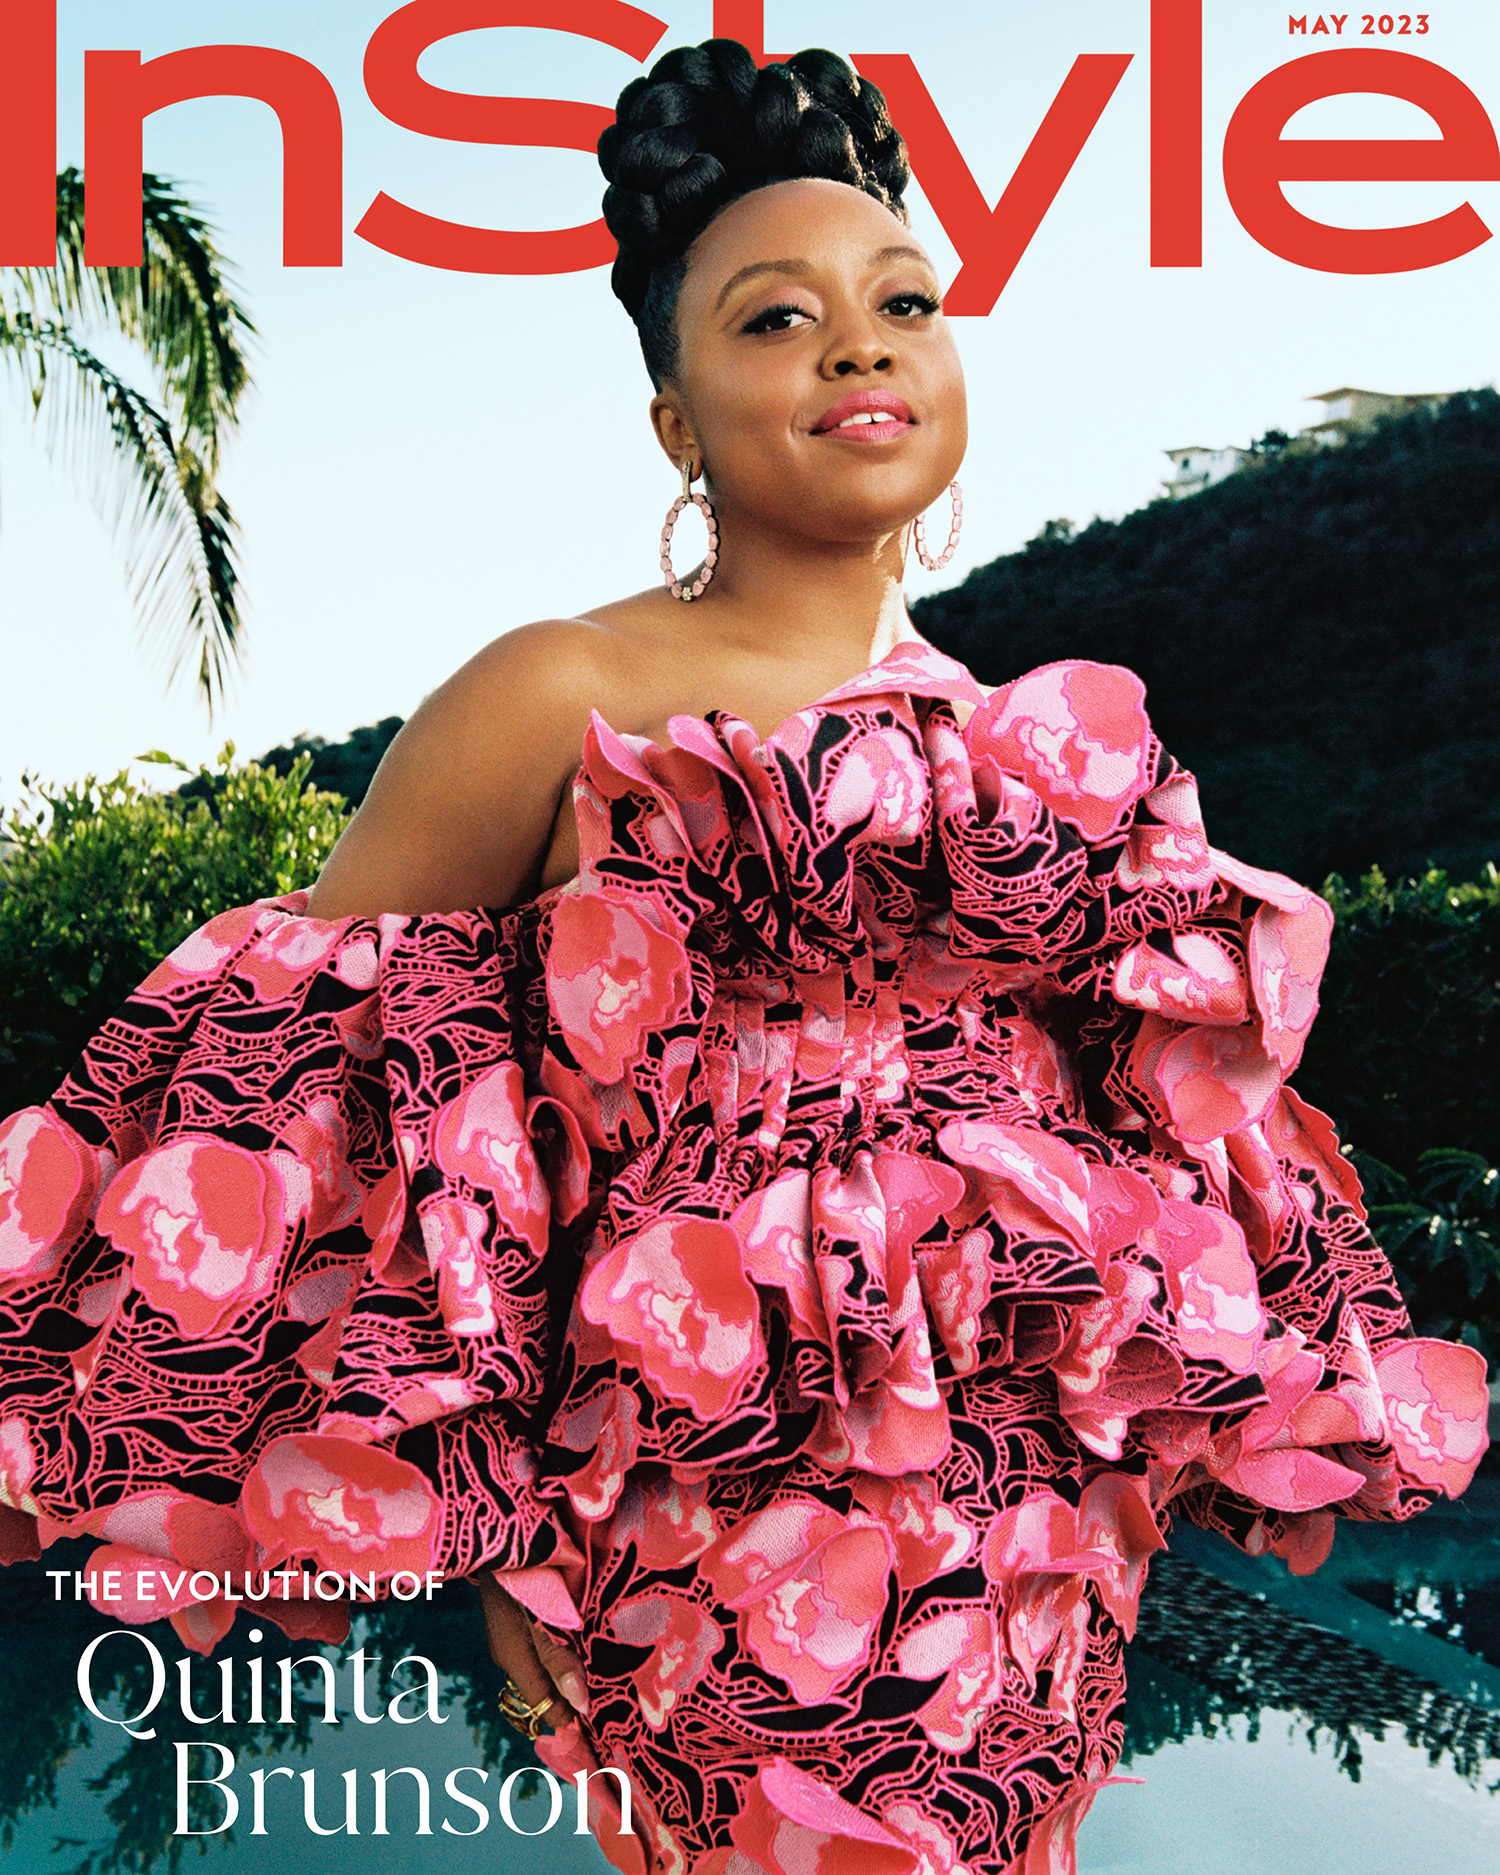 Quinta Brunson covers InStyle US May 2023 by Rosaline Shahnavaz